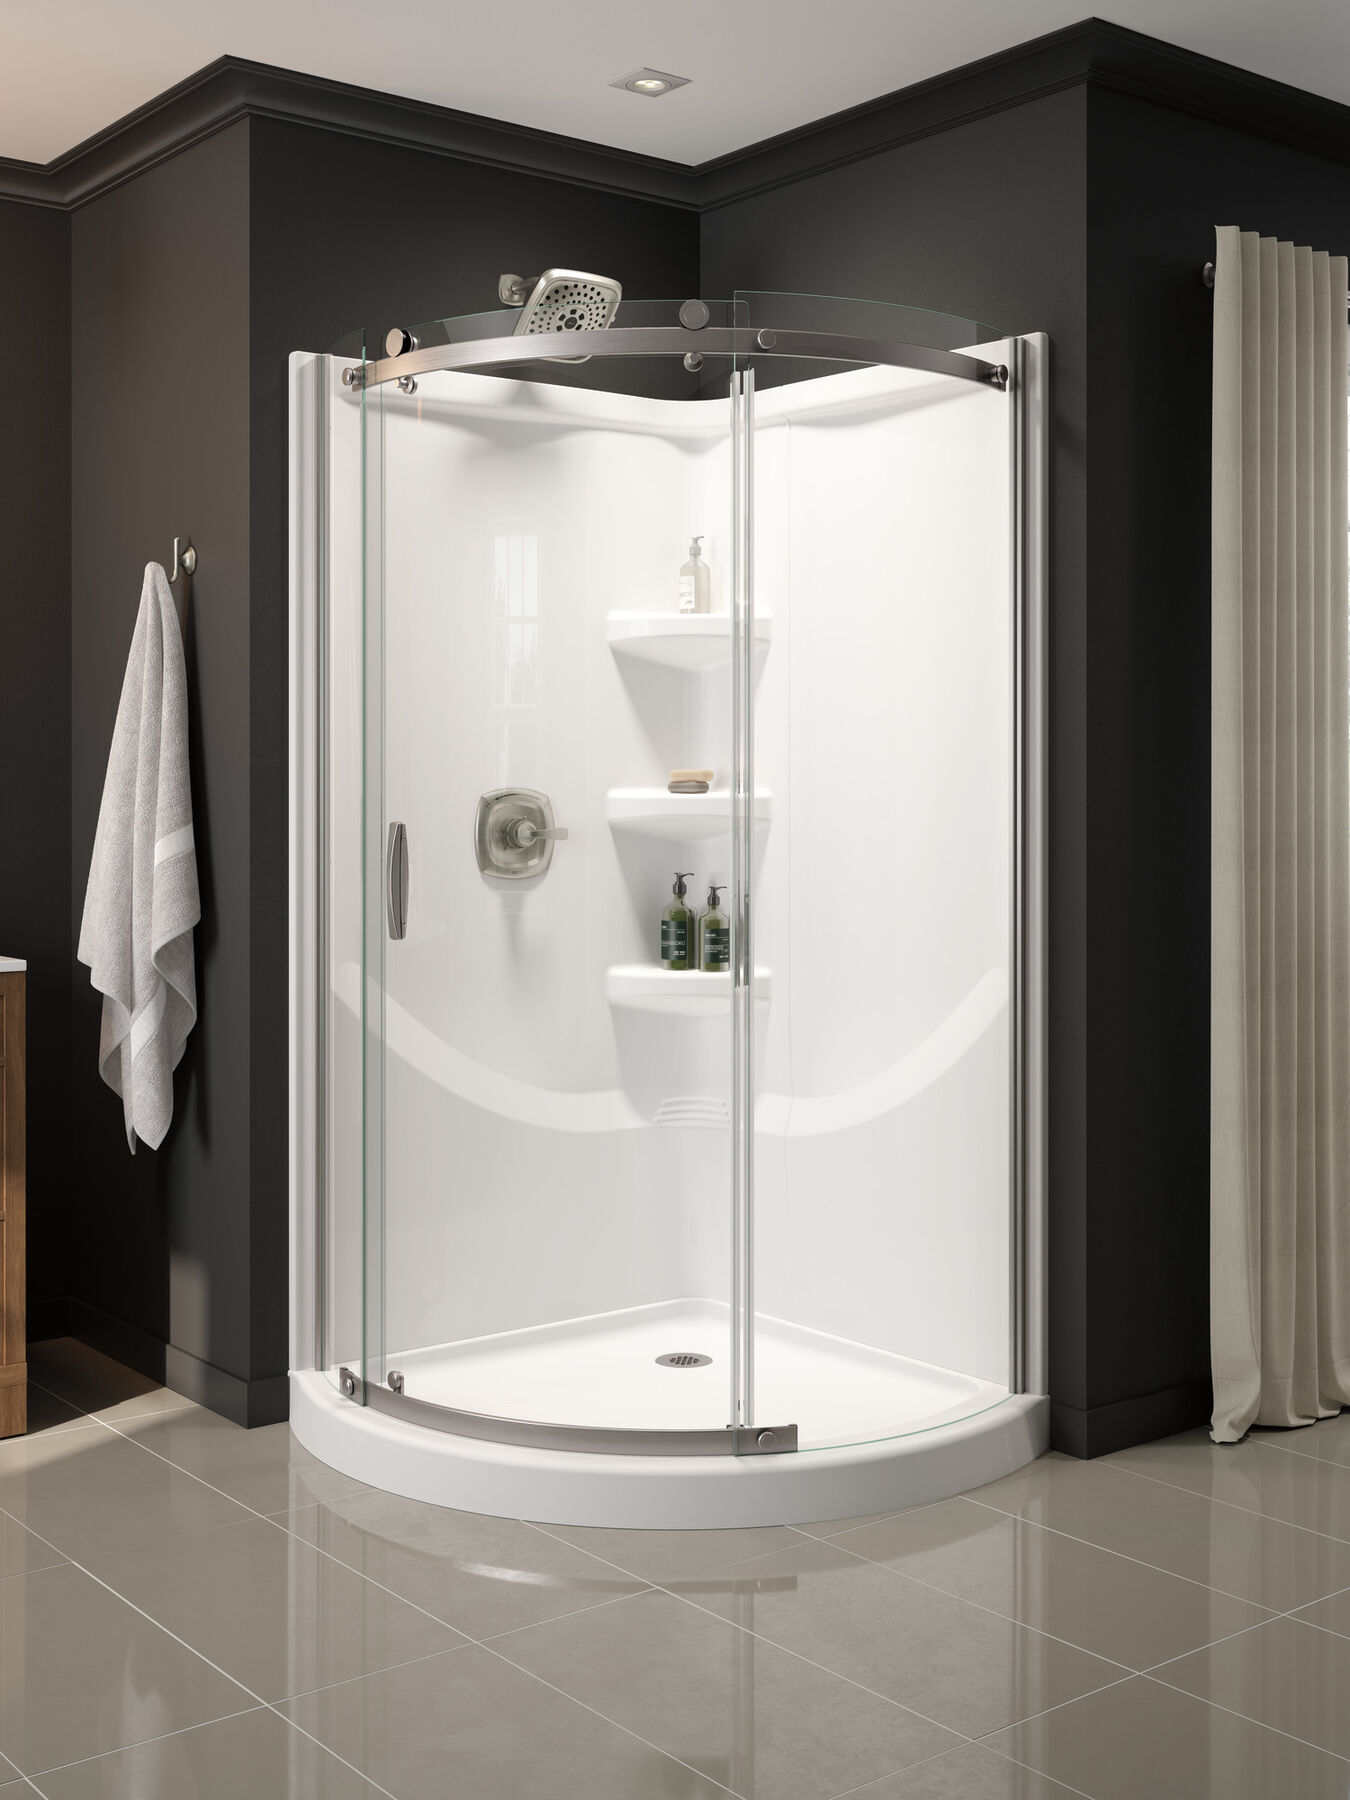 Round Corner Shower Enclosure in Stainless B911917-3838-SS